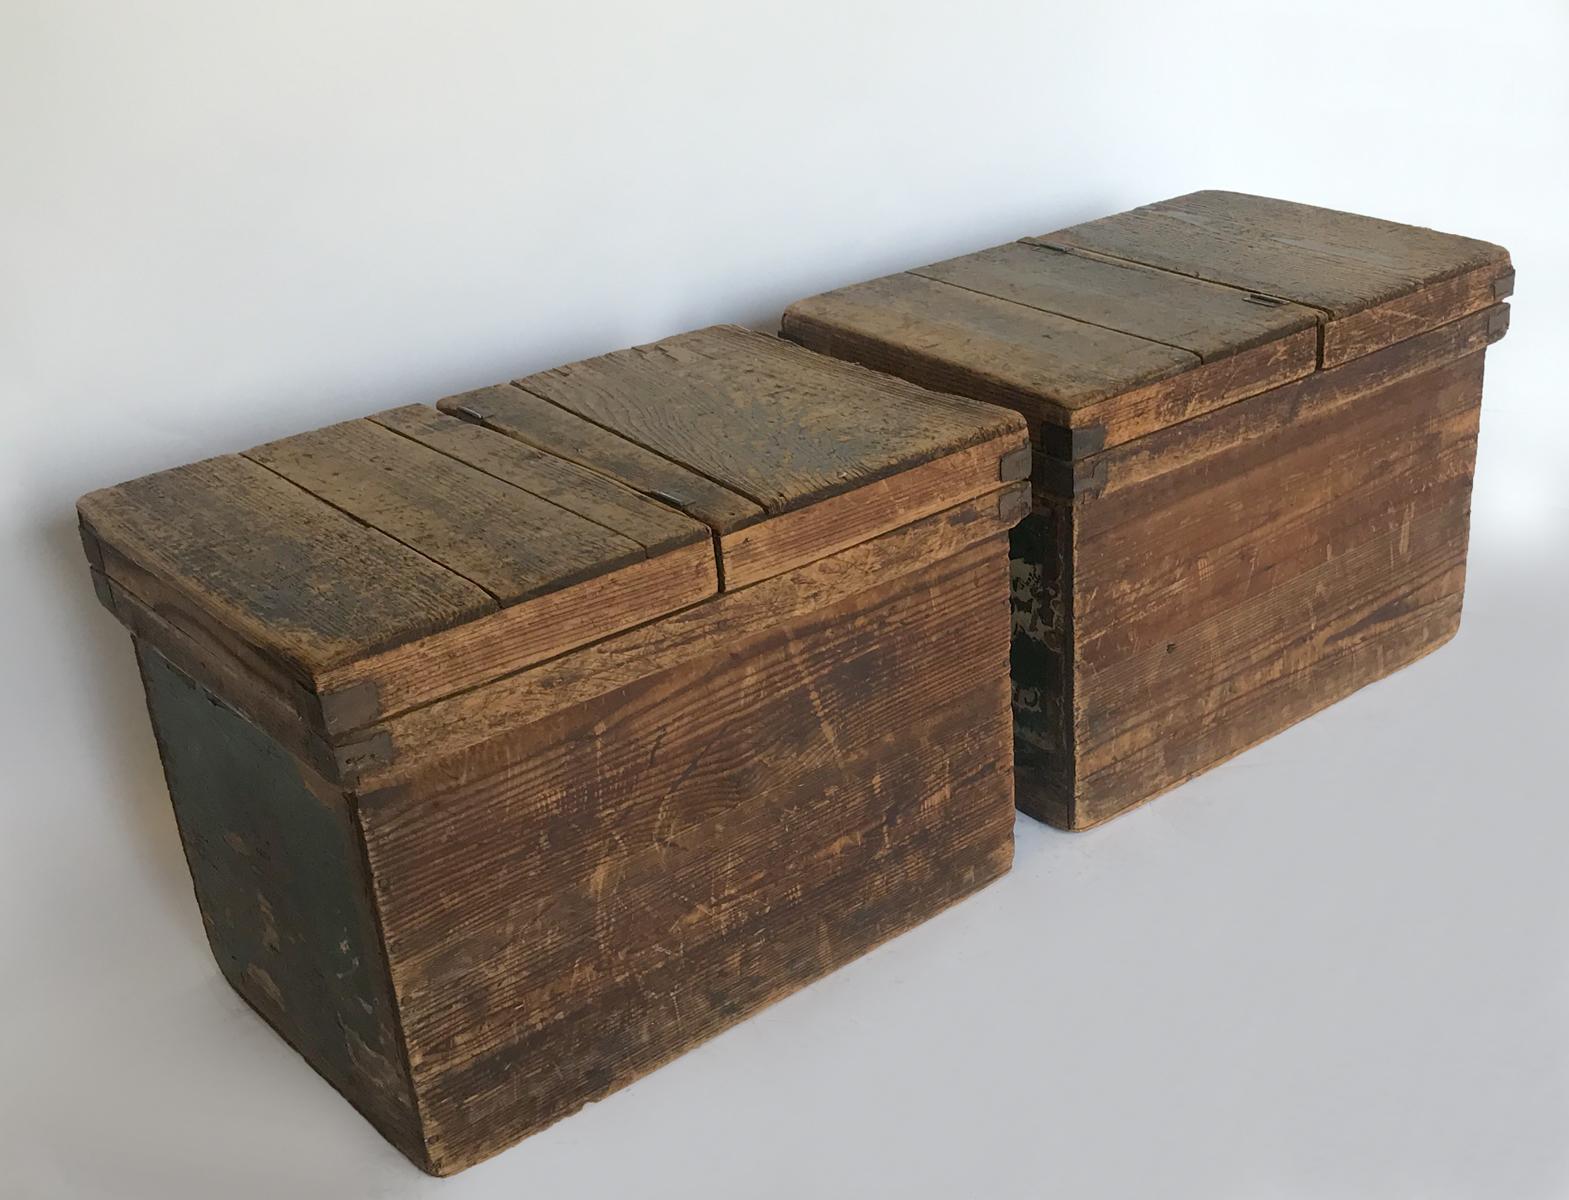 Can be sold separately. Price is for one.
These tin lined boxes are vintage and made from light weight wood. Tops lift off. Both have original labels on the side. Great as side tables or put together as a simple bench, or as a planter box, endless